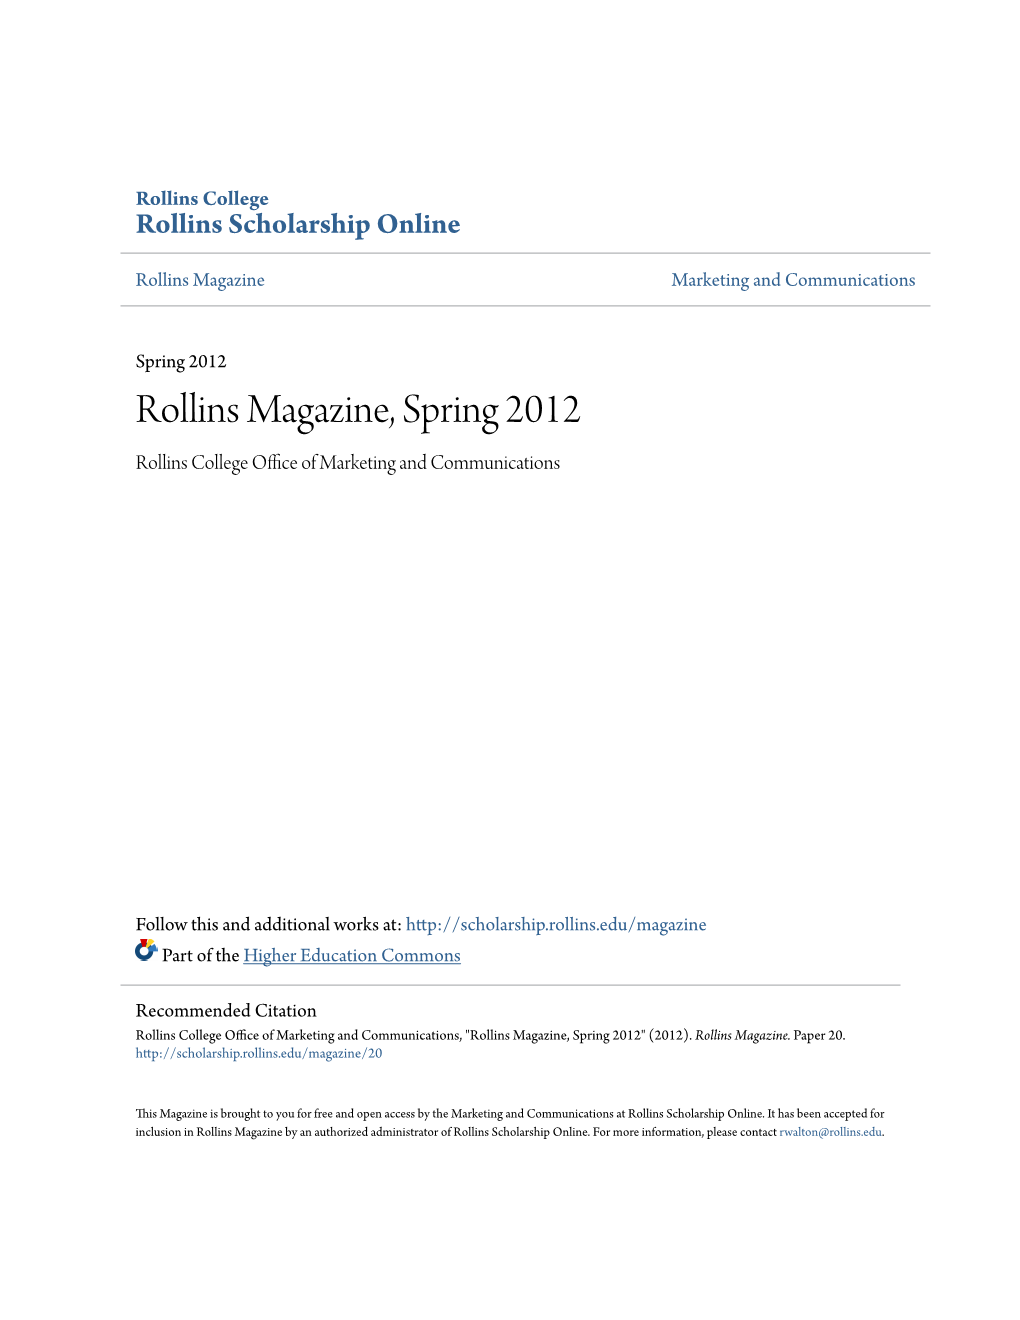 Rollins Magazine, Spring 2012 Rollins College Office Ofa M Rketing and Communications